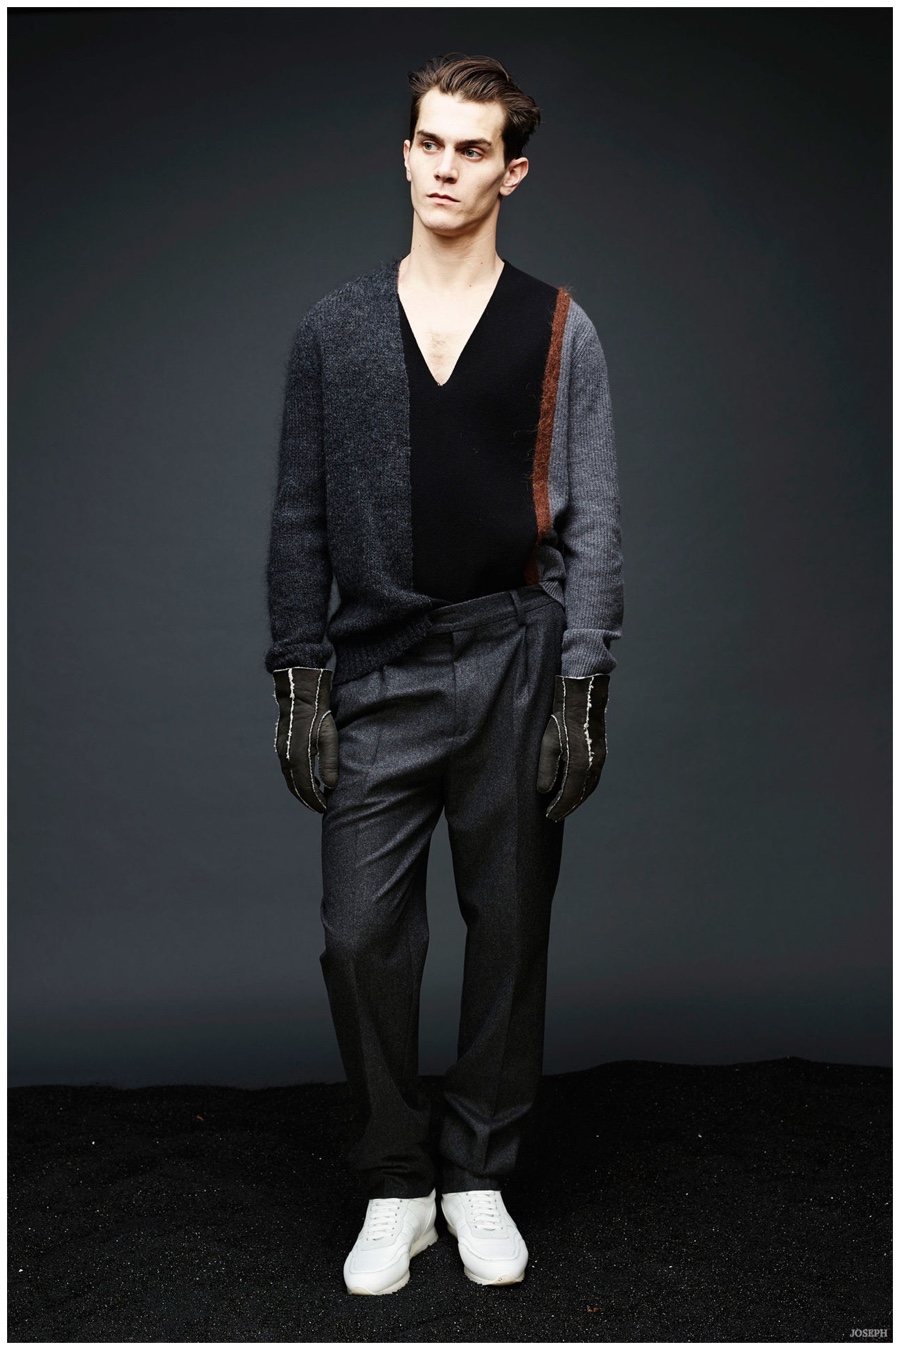 Joseph Furnishes Loose, Slouchy Fashions for Fall/Winter 2015 Menswear ...